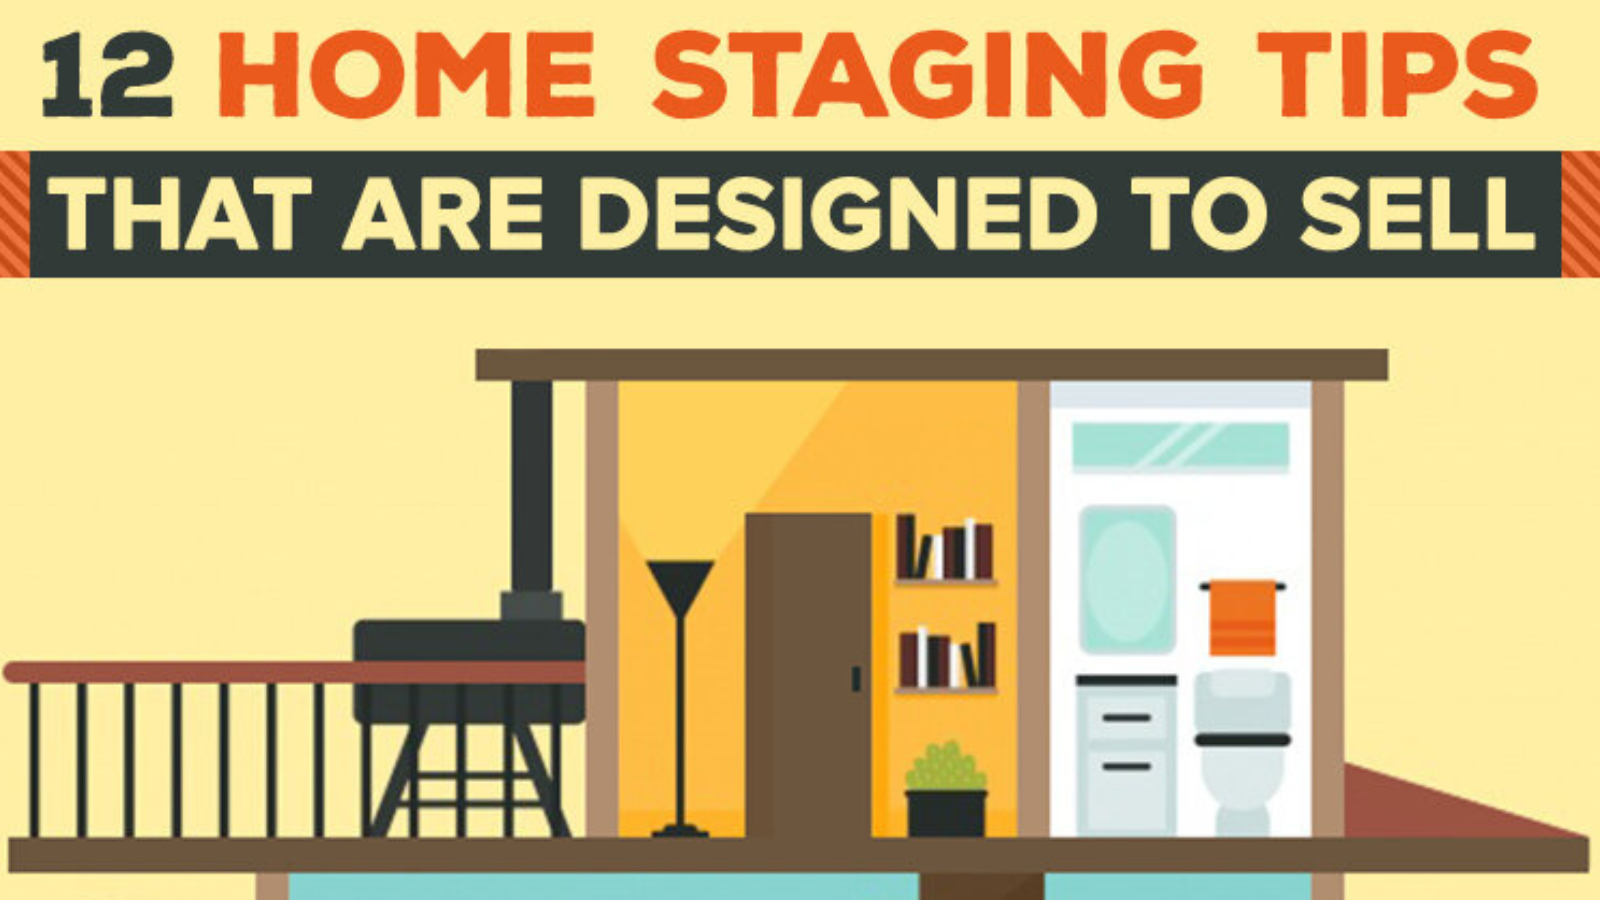 12 Essential Home Staging Tips to Sell Your Bay Area Home